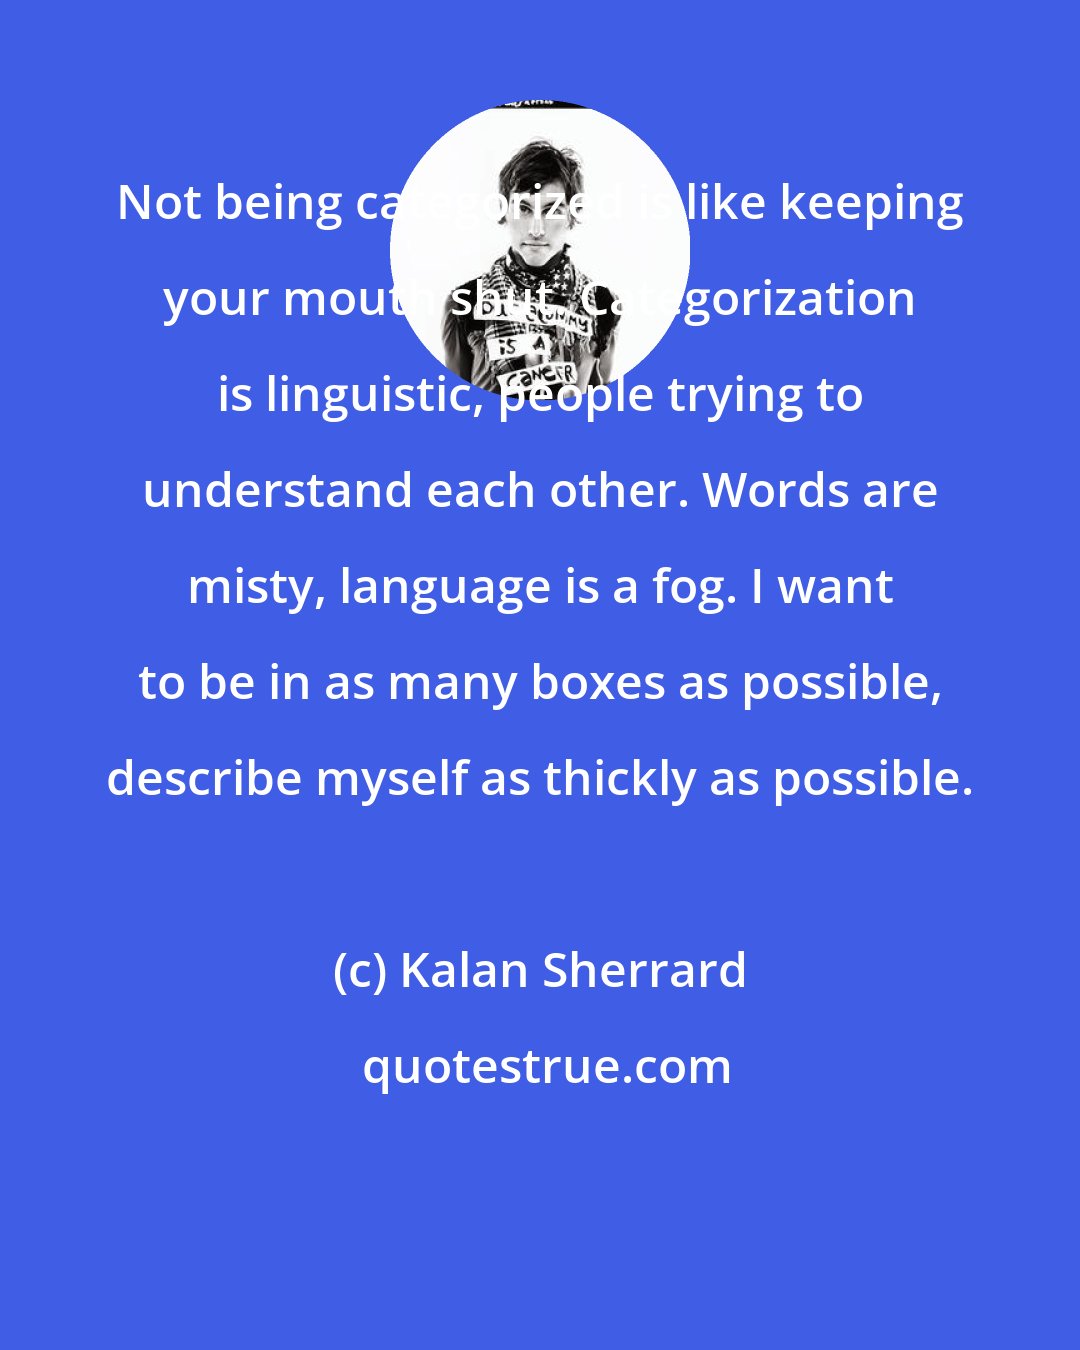 Kalan Sherrard: Not being categorized is like keeping your mouth shut. Categorization is linguistic, people trying to understand each other. Words are misty, language is a fog. I want to be in as many boxes as possible, describe myself as thickly as possible.